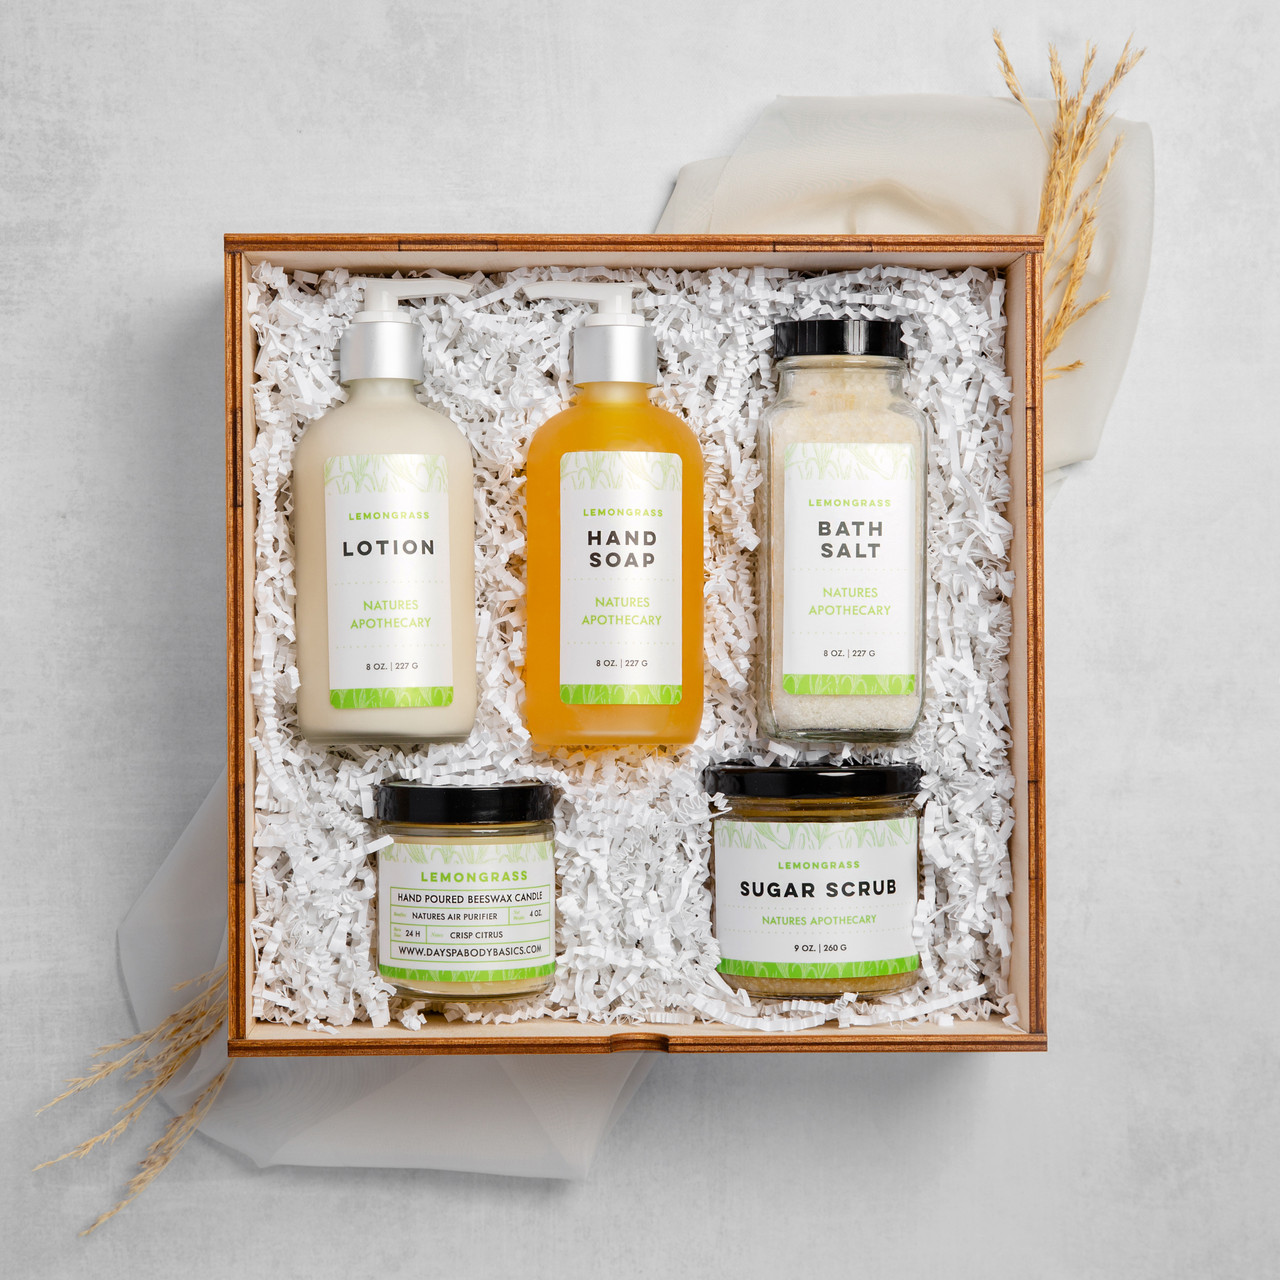 Lemongrass - The Gift of Luxury - Perfect House Warming Gift - Curated Gifts By DAYSPA Body Basicsdy Basics Gift Box Made in USA